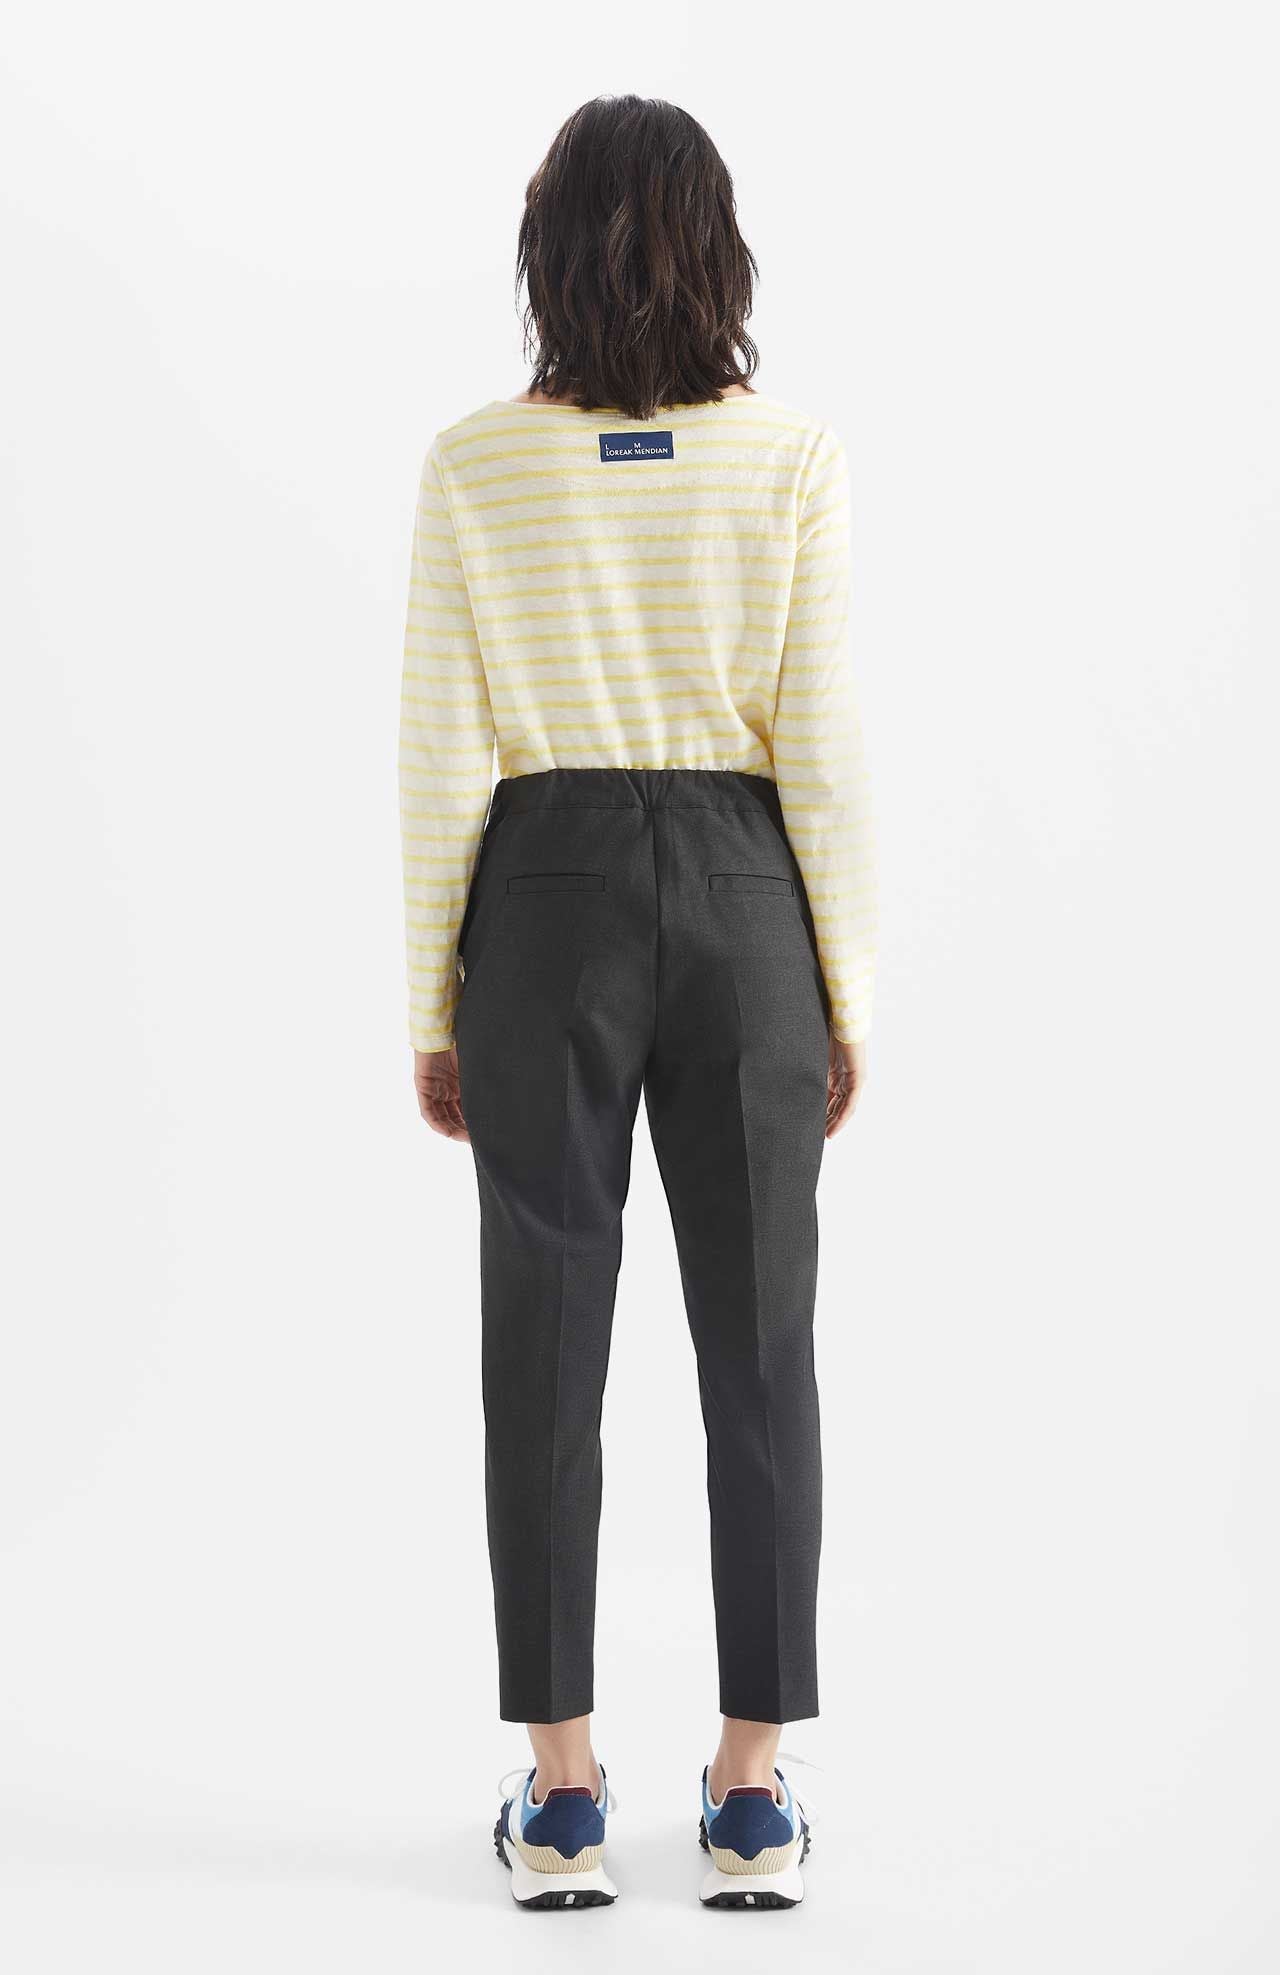 Person wears Alaiak trousers in a dark grey shade. The pants are worn with a yellow and white striped long sleeve top. Back view.